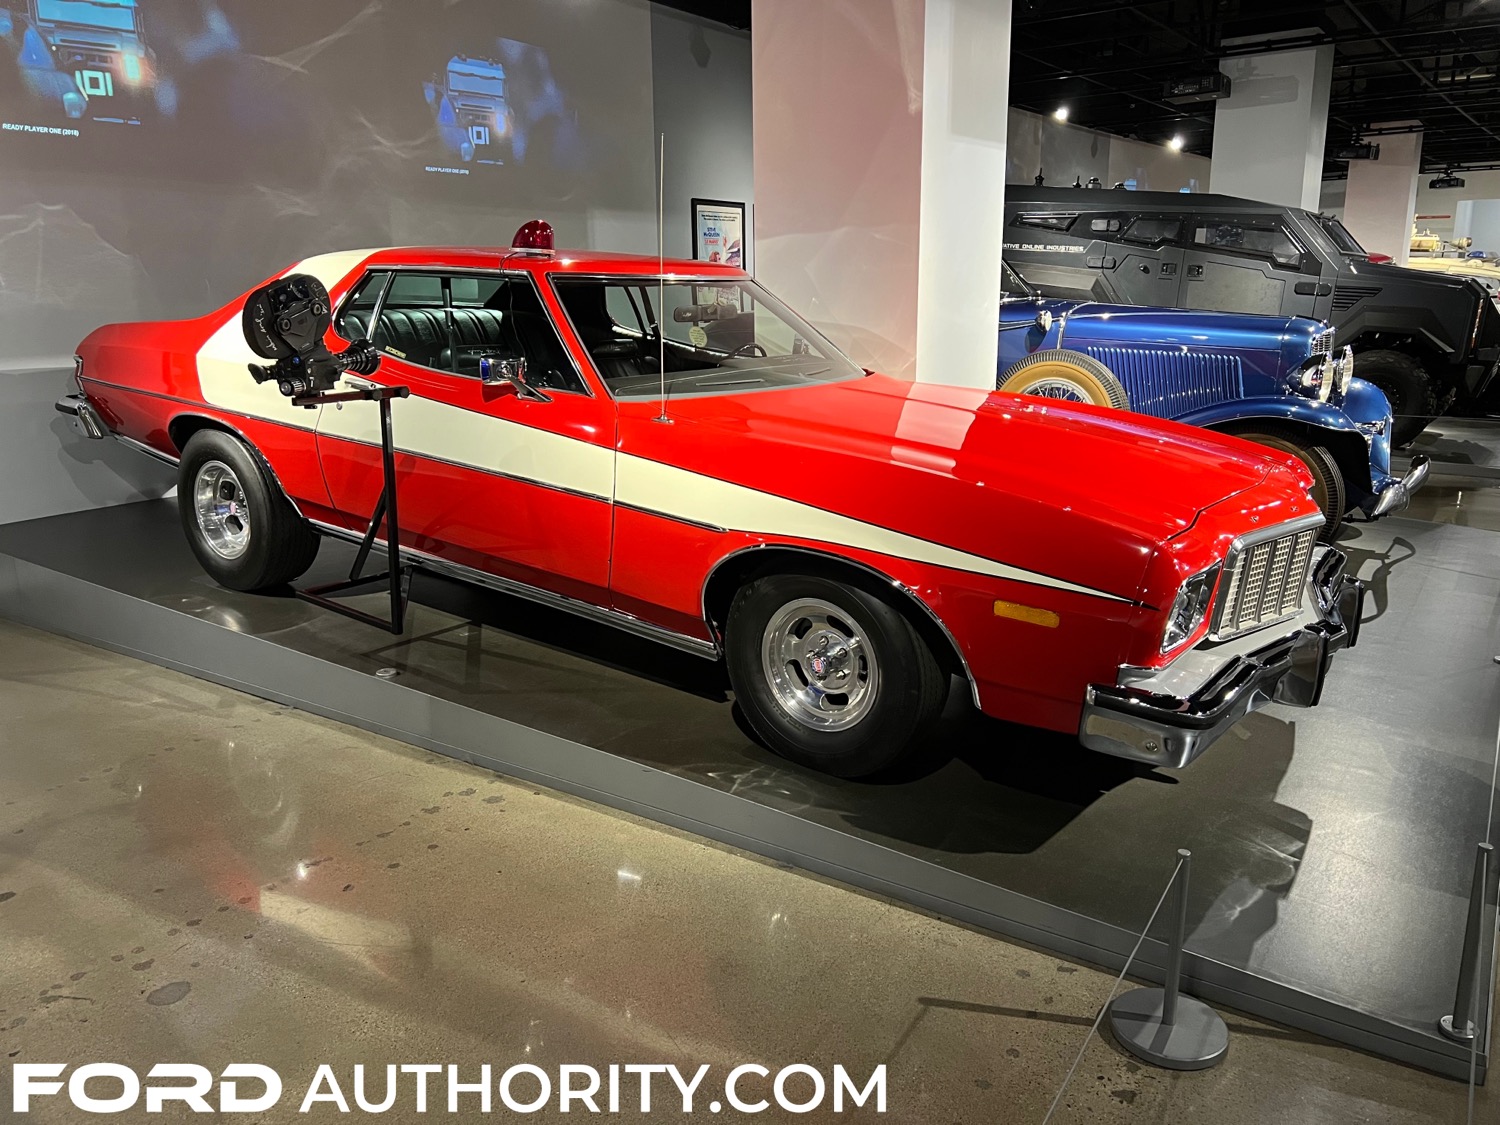 1976 Ford Gran Torino Featured in Starsky & Hutch Is Up for Sale